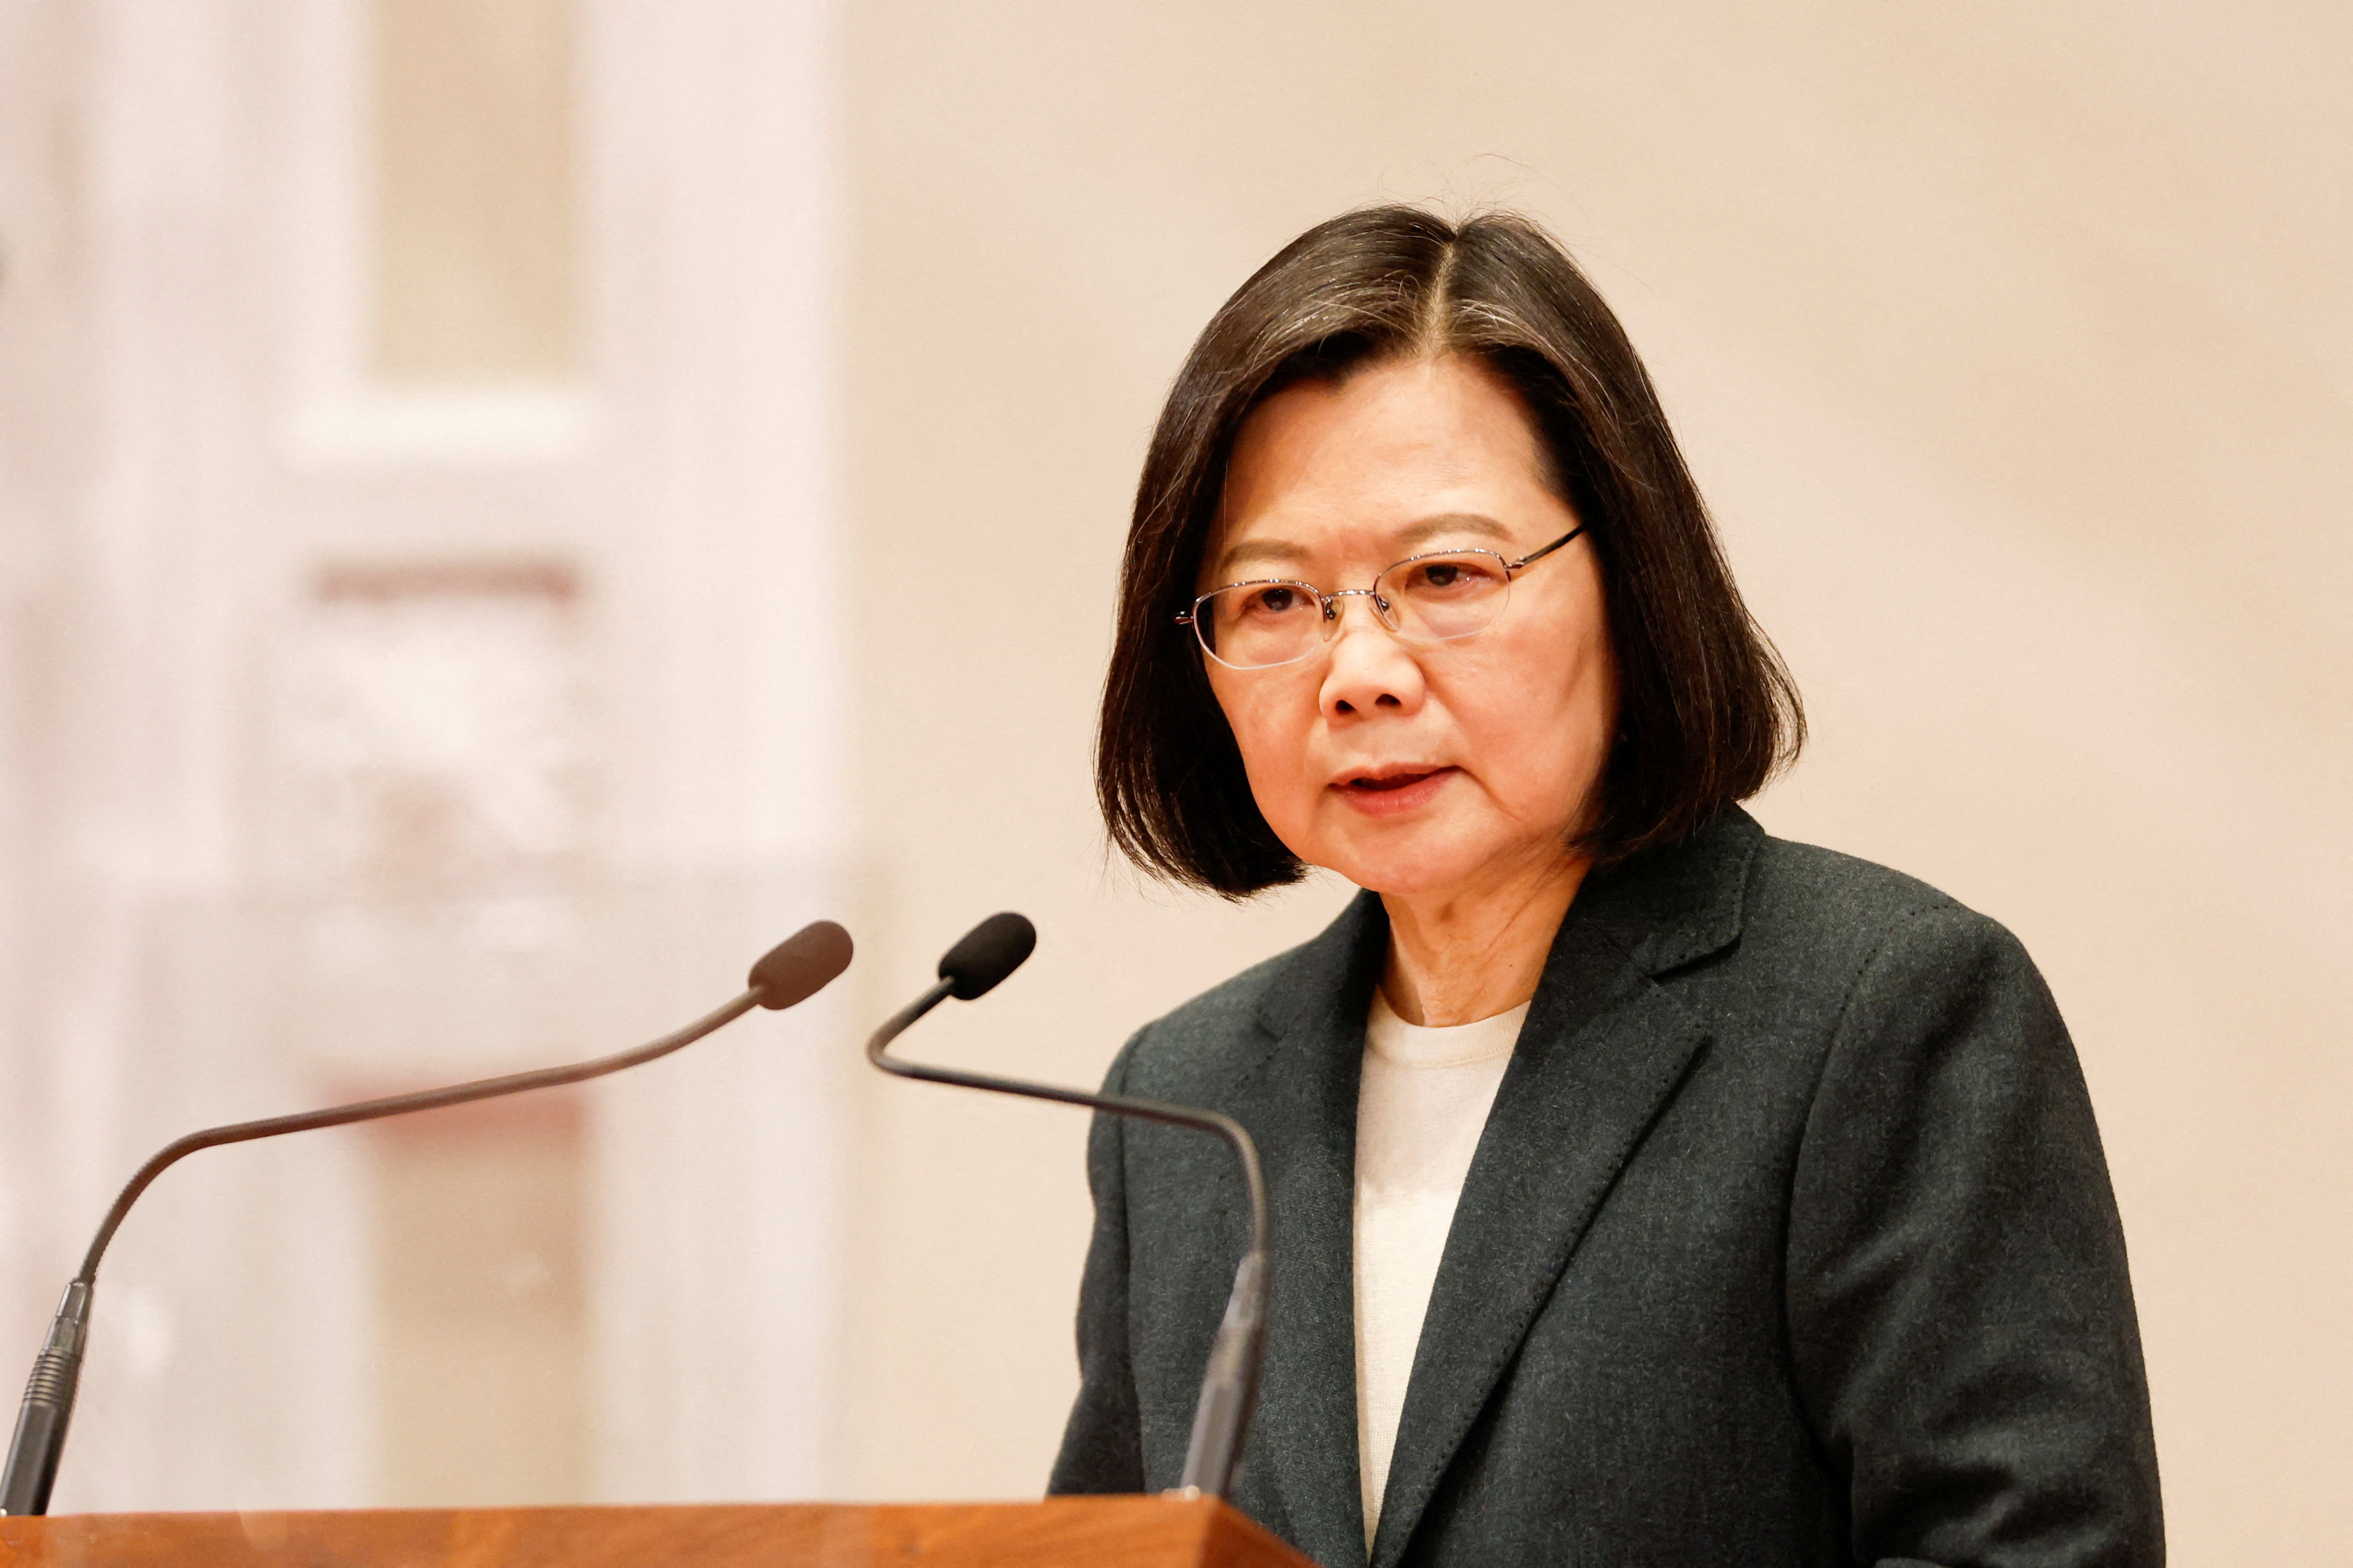 Taiwan president Tsai Ing-wen speaks during a news conference in Taipei on 27 January 2023